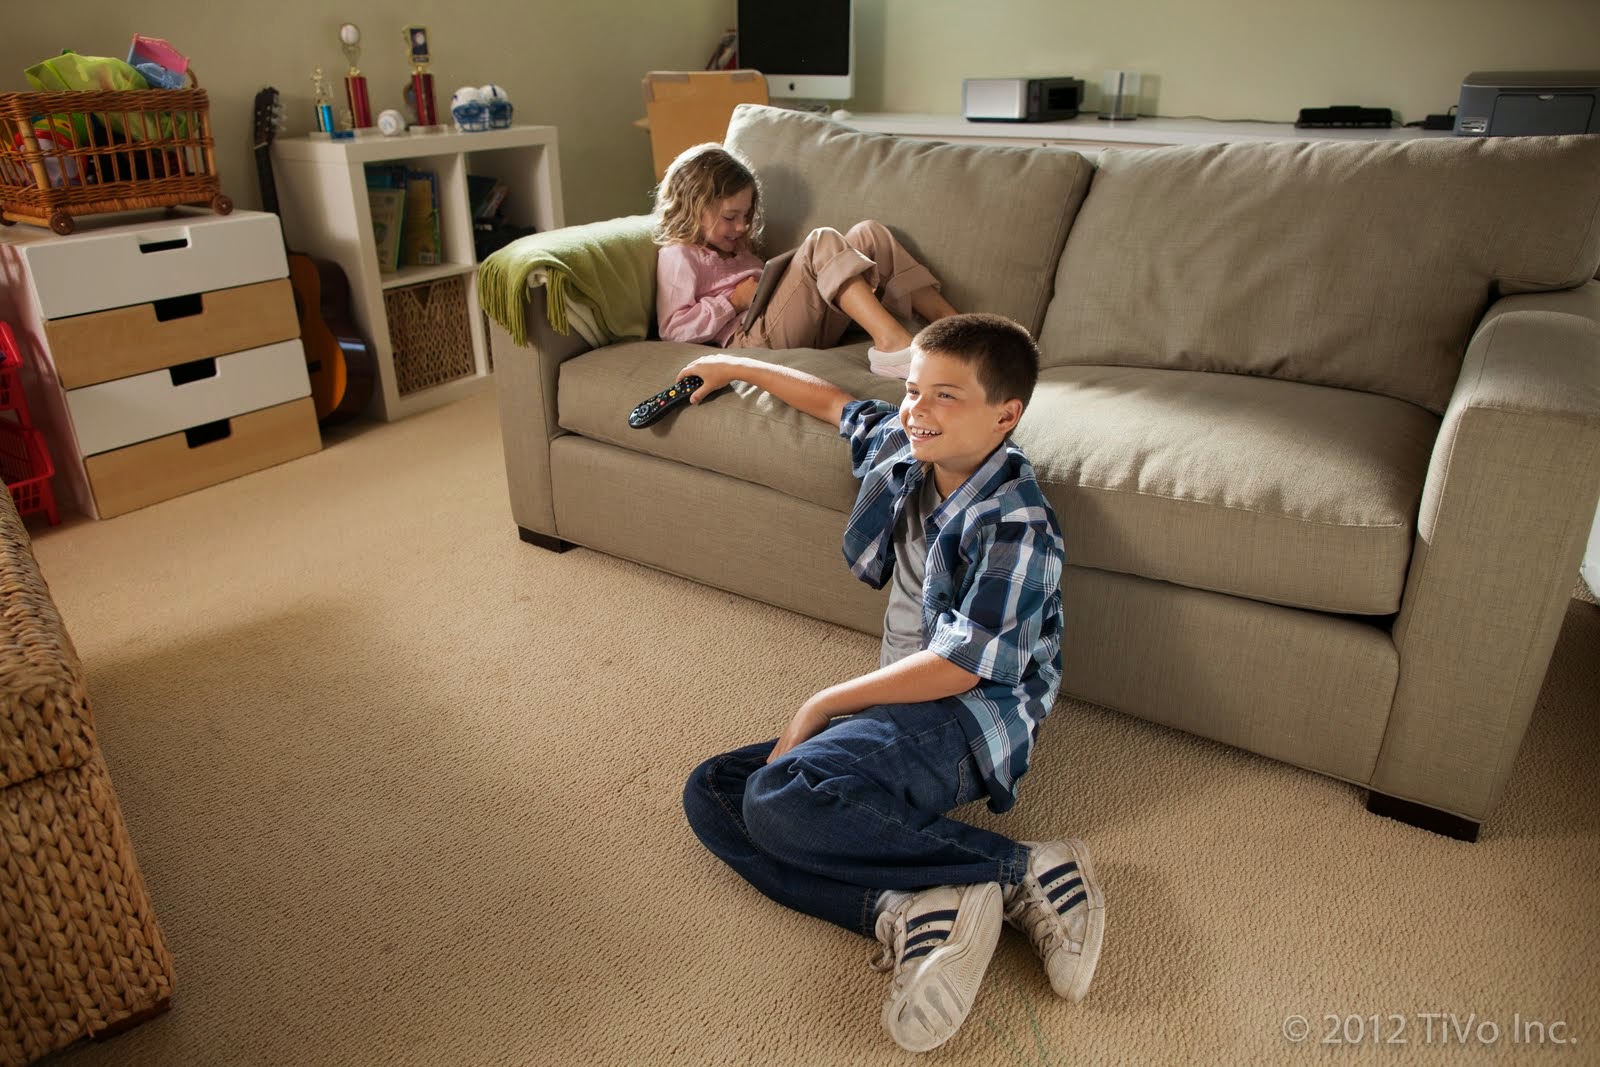 Boy watching tv while girl looks at tablet in the Livingroom